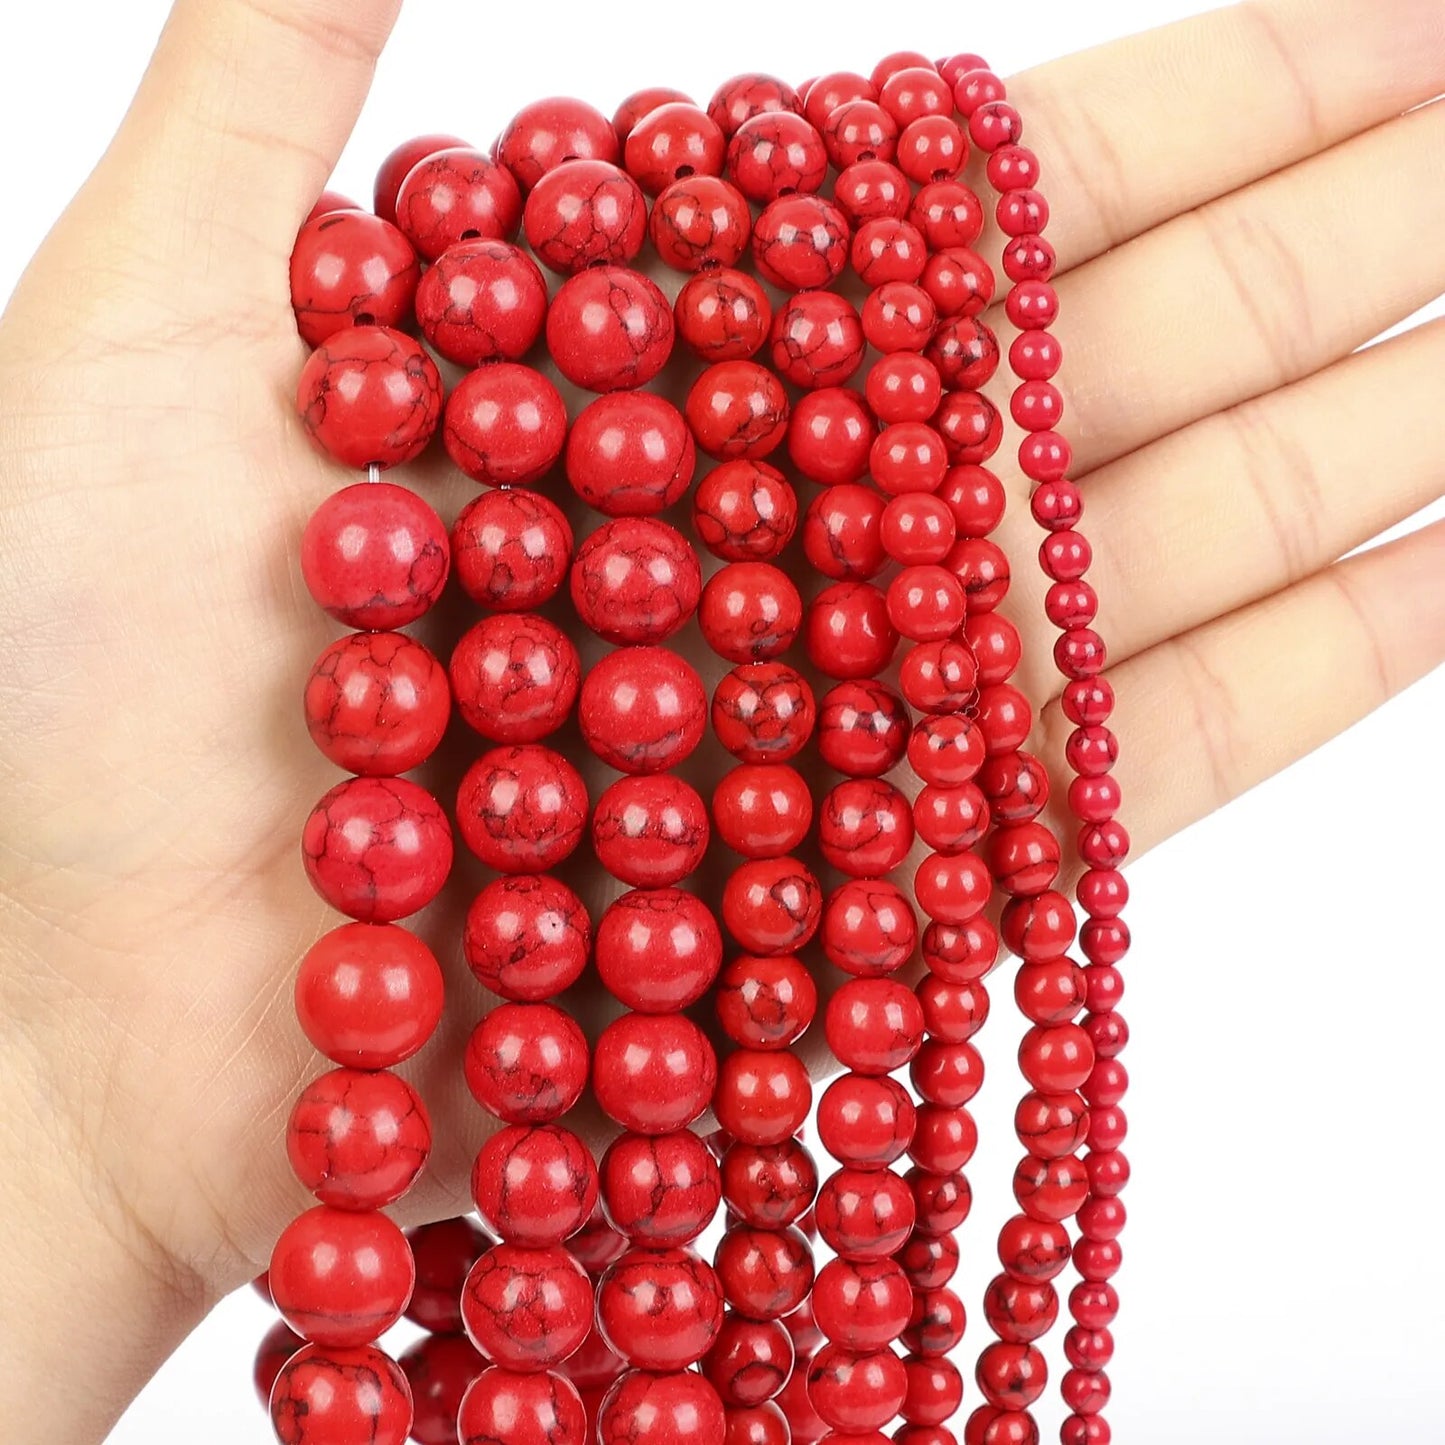 Red Howlite Turquoise Beads, 2-12mm